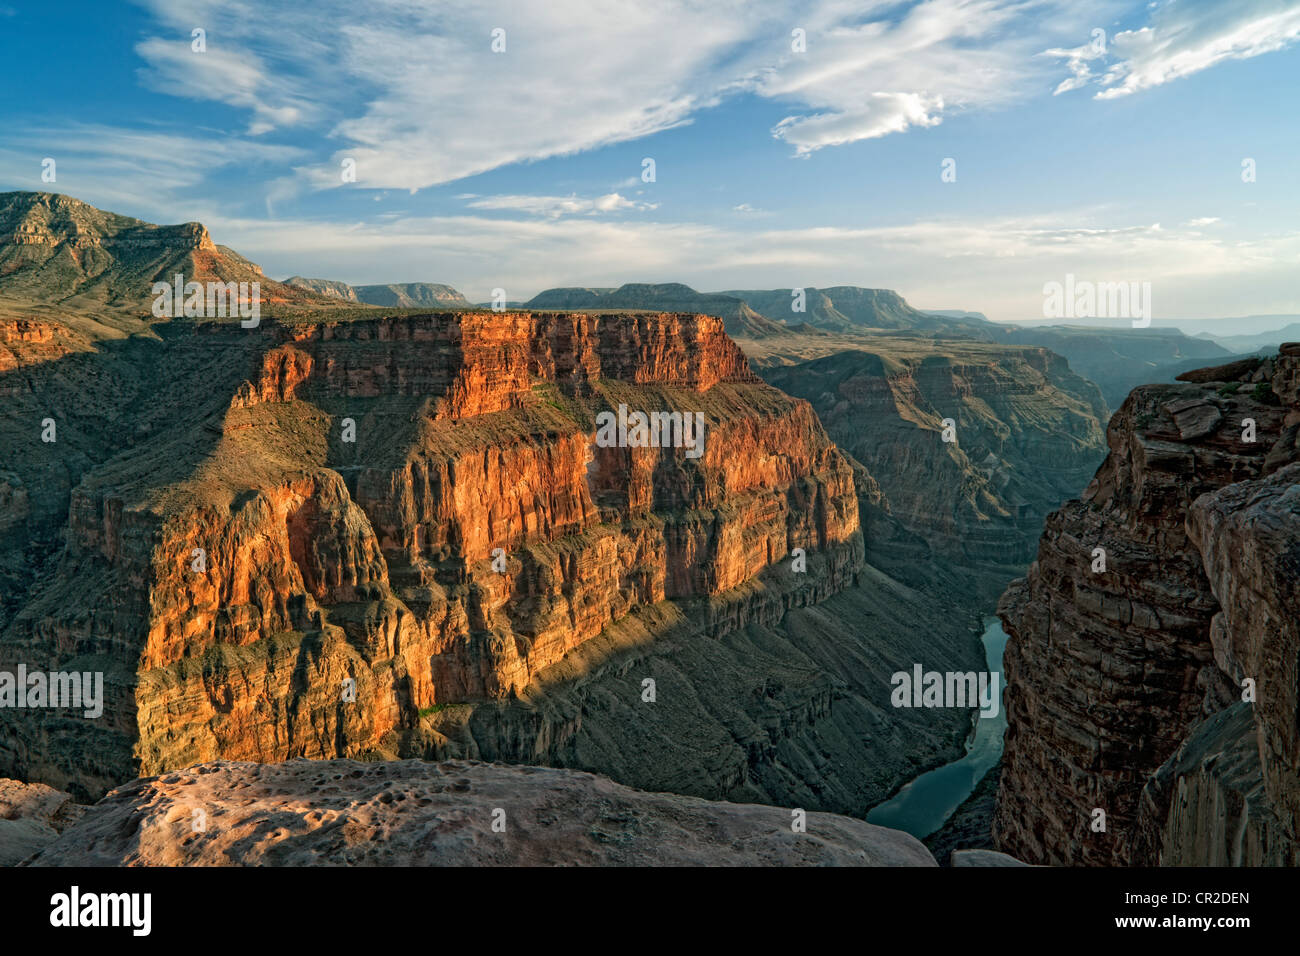 Evening light bathes the walls of Arizona’s Grand Canyon National Park from Toroweap with the Colorado River 3,000 feet below. Stock Photo